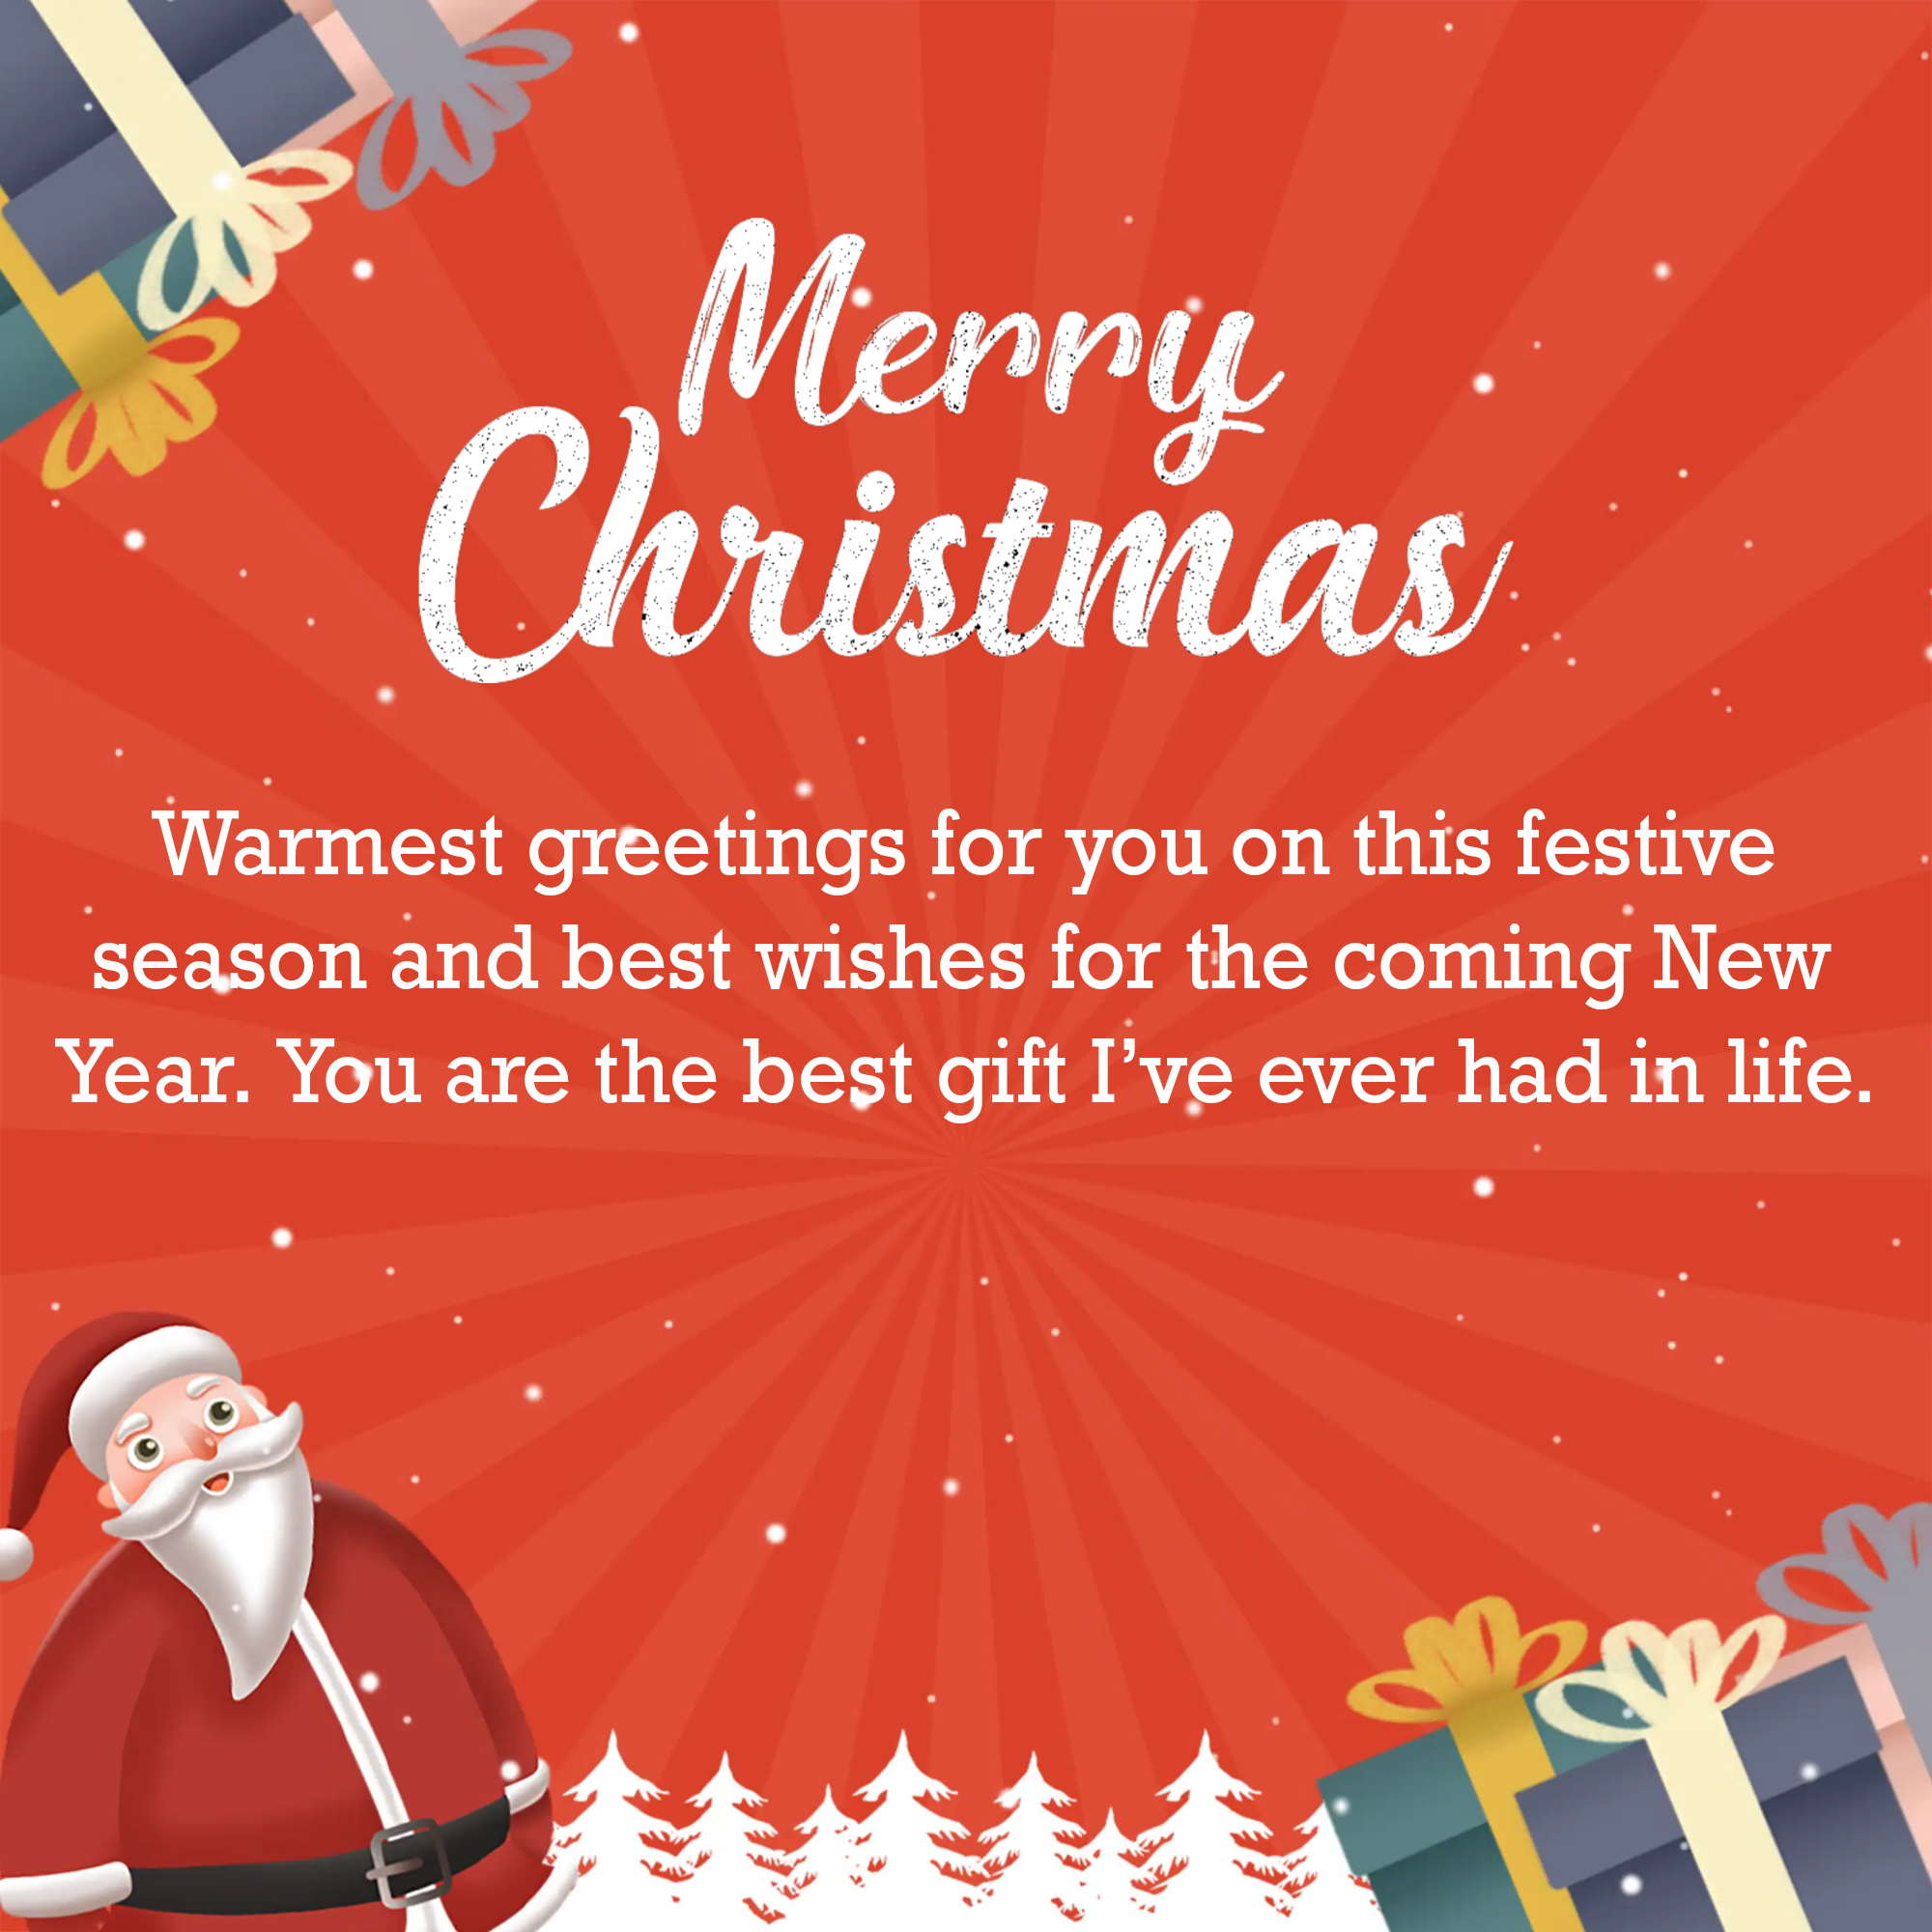 Warmest greetings for you on this festive season